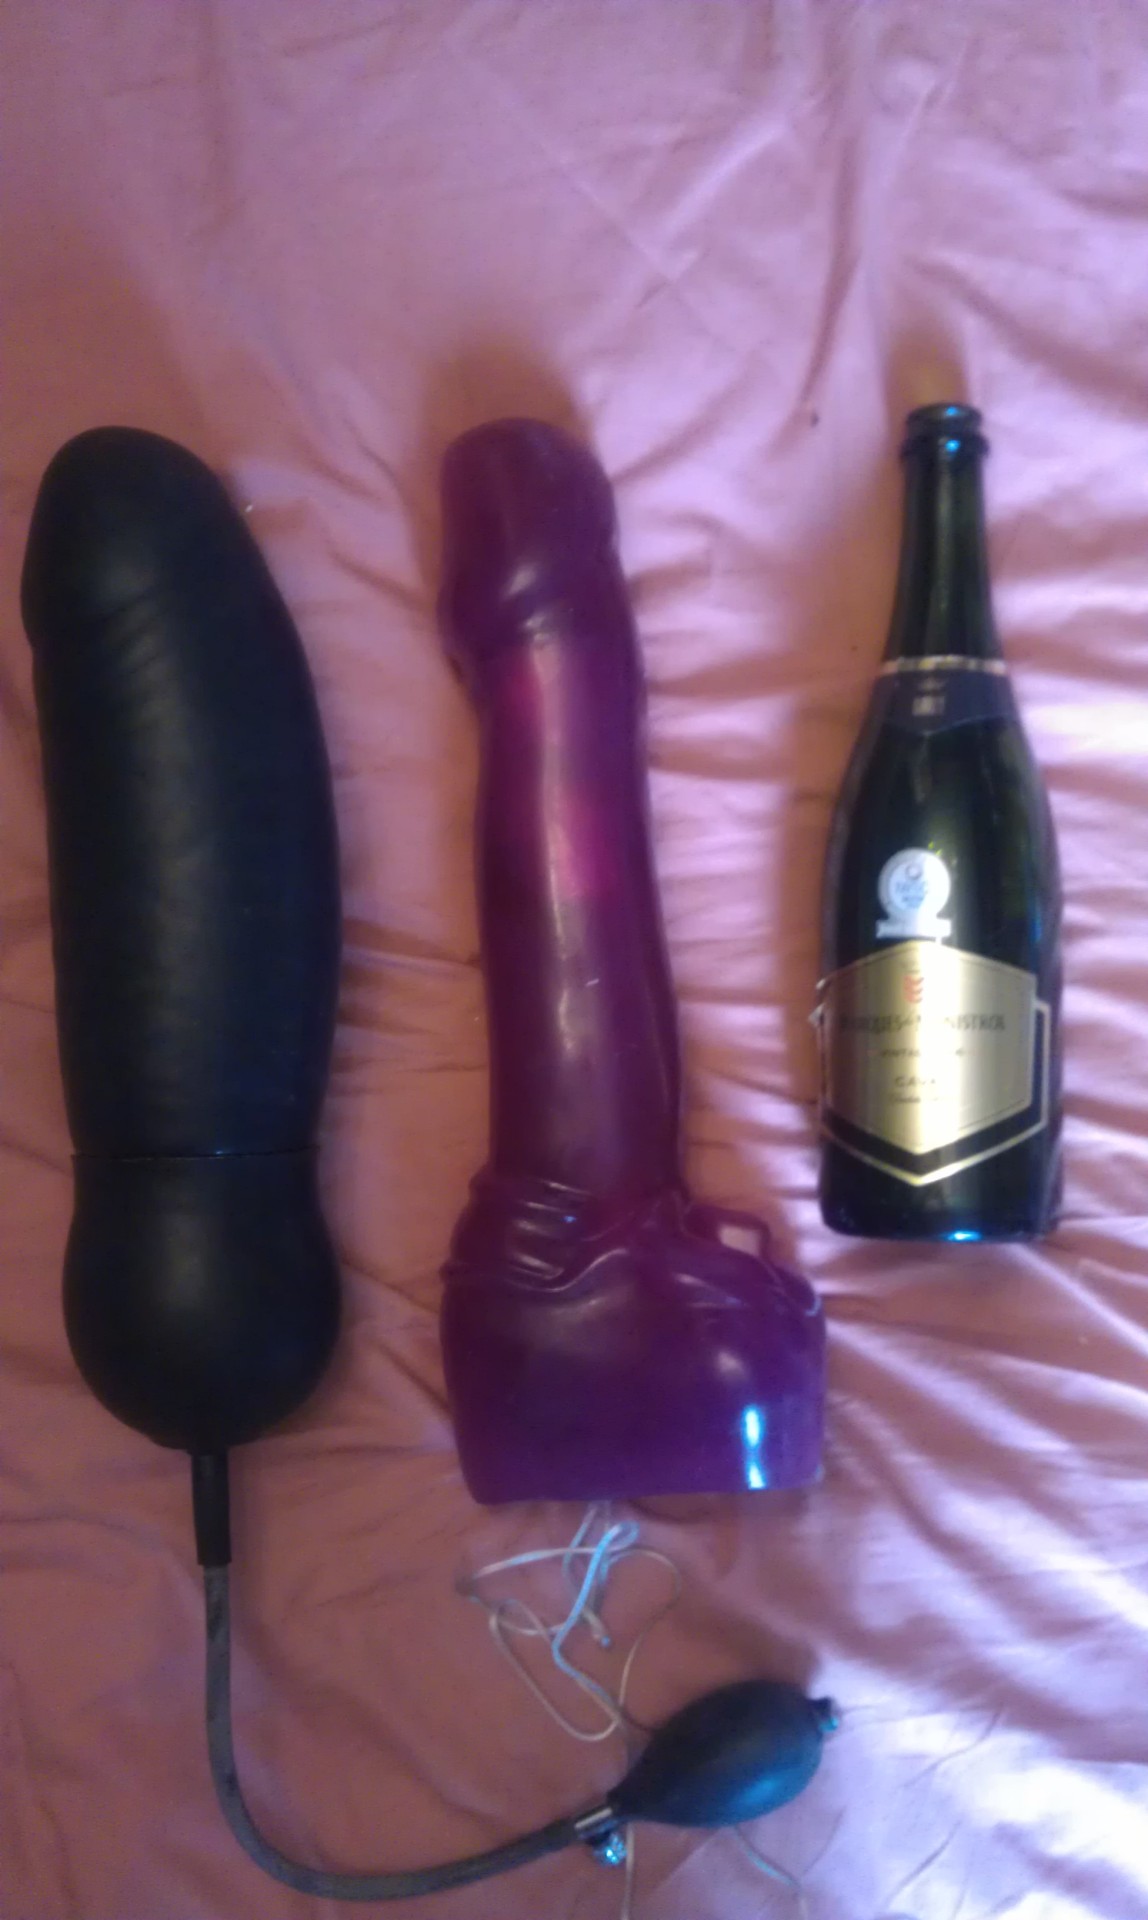 kinky-gal:  These are two of my mum’s biggest toys, the wine bottle is not just